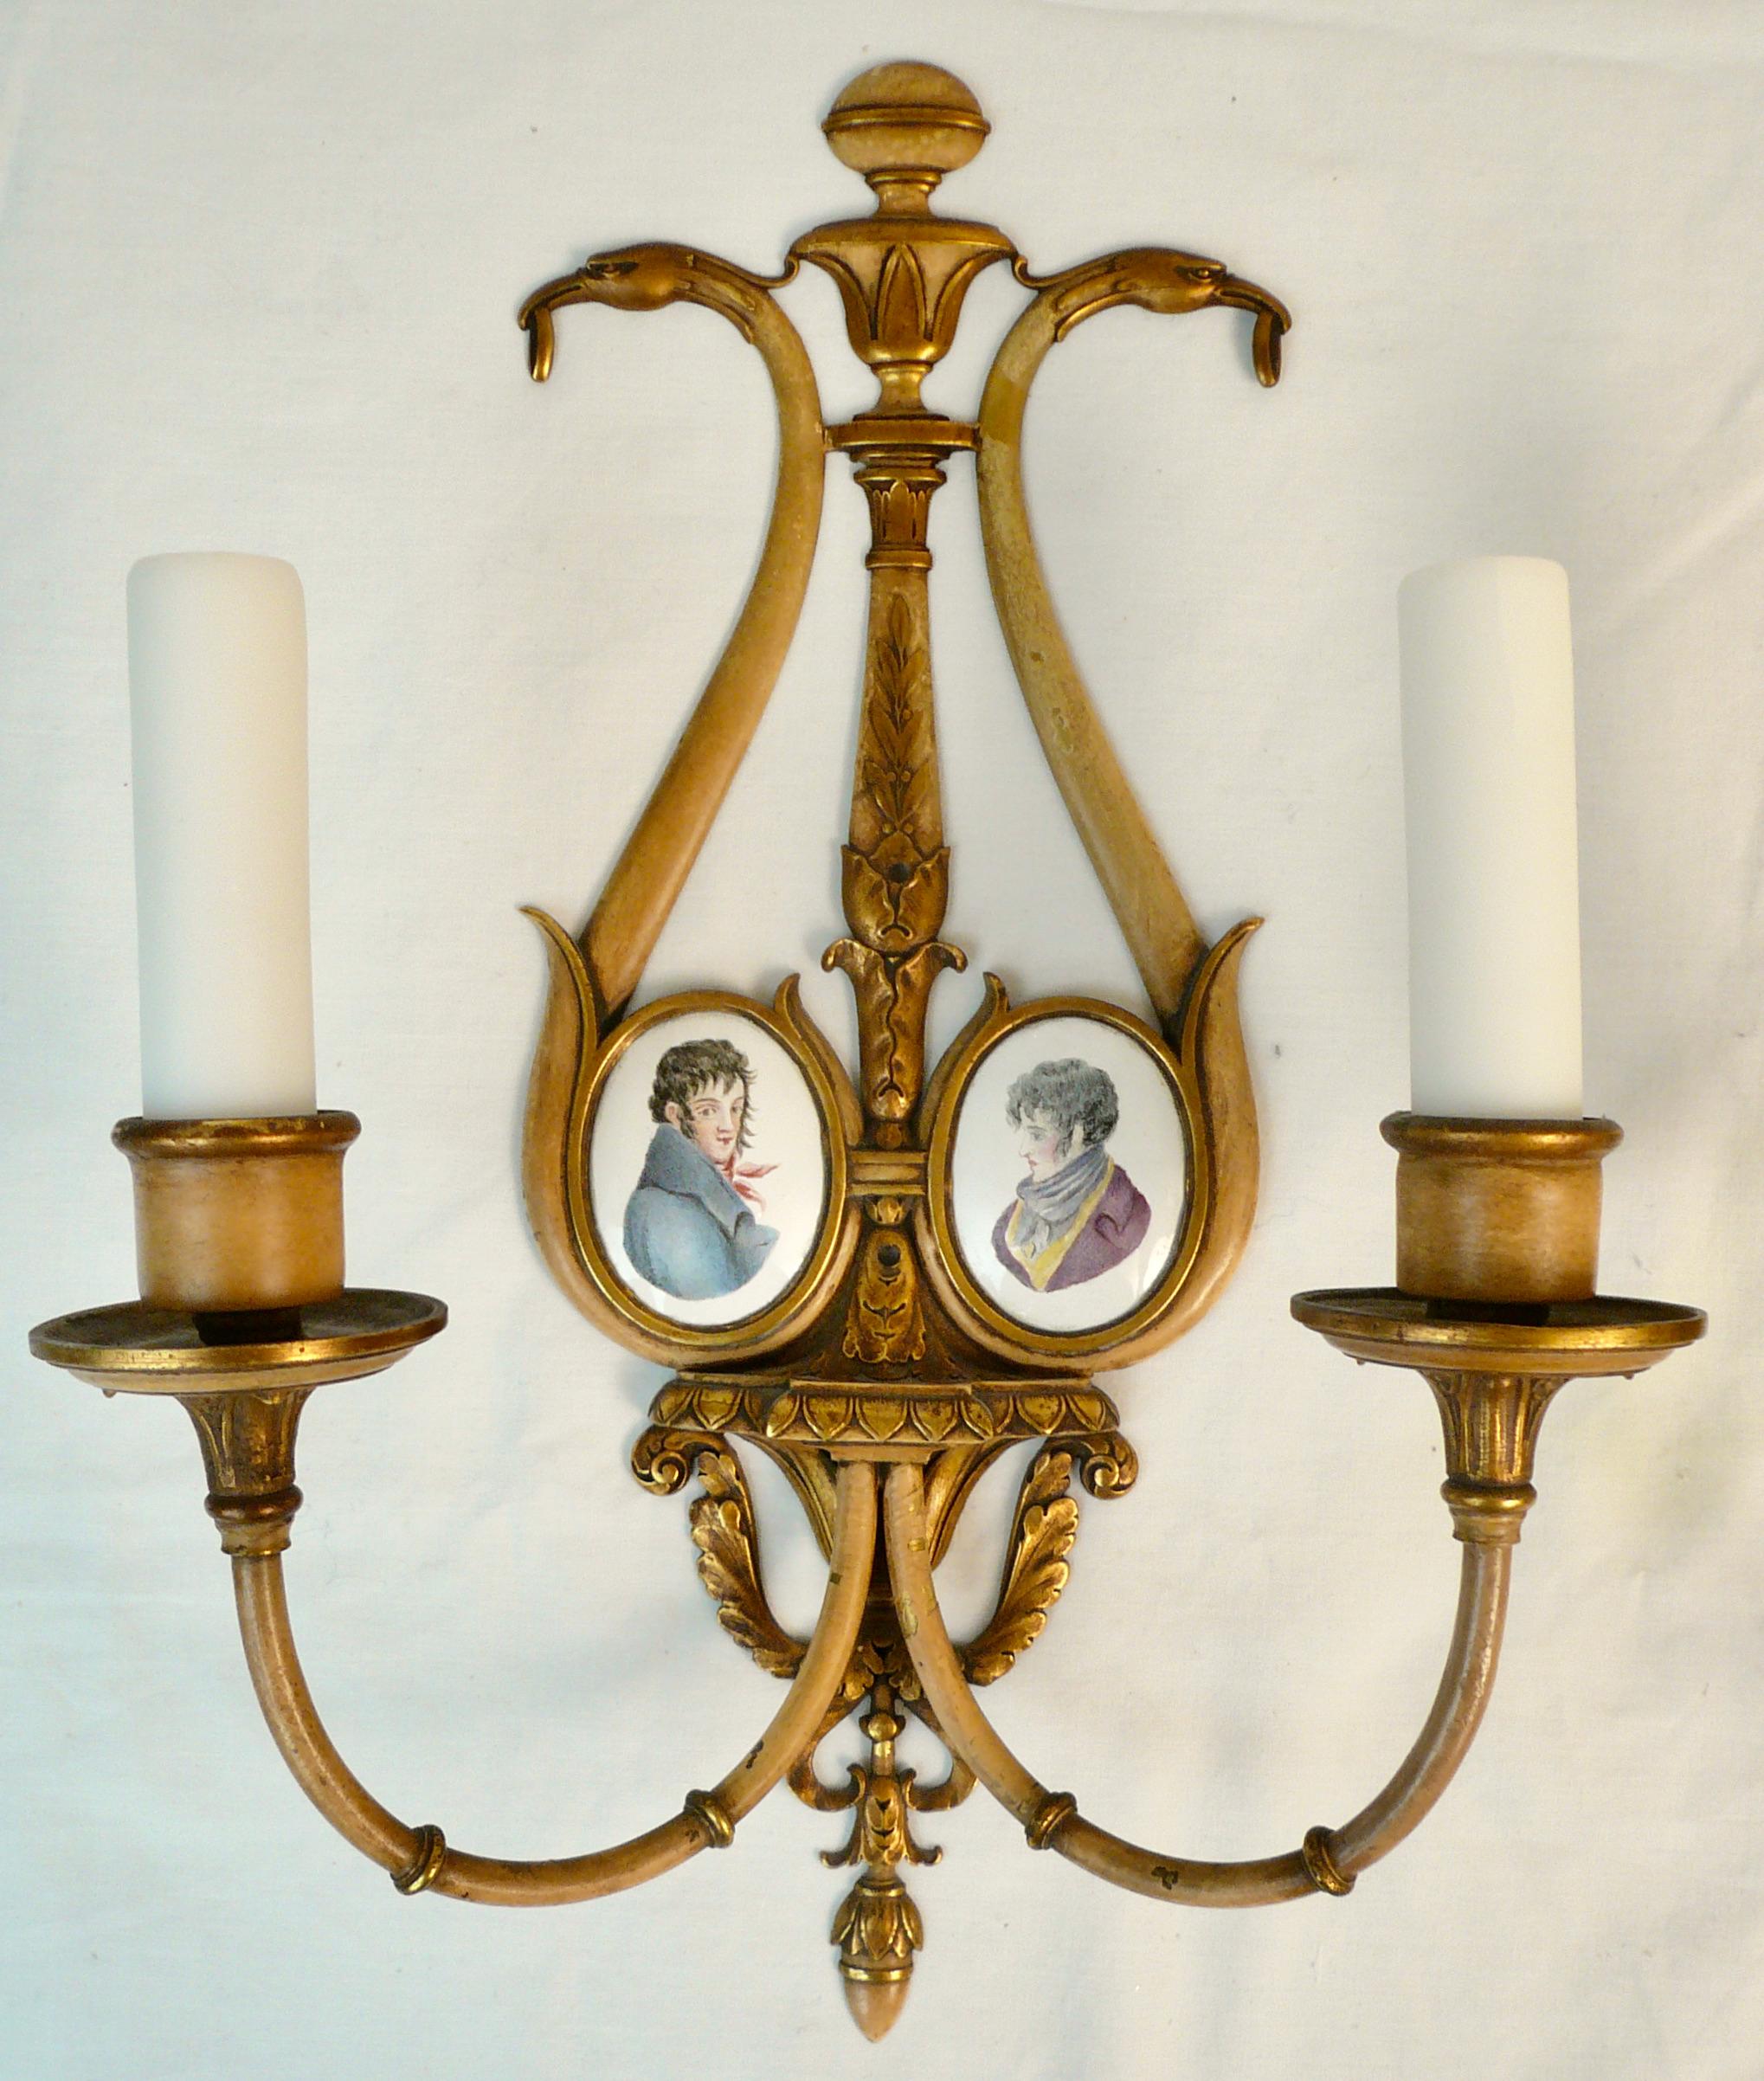 This pair of English Regency style partial gilt and polychrome painted sconces feature oval Battersea type enamel on copper 